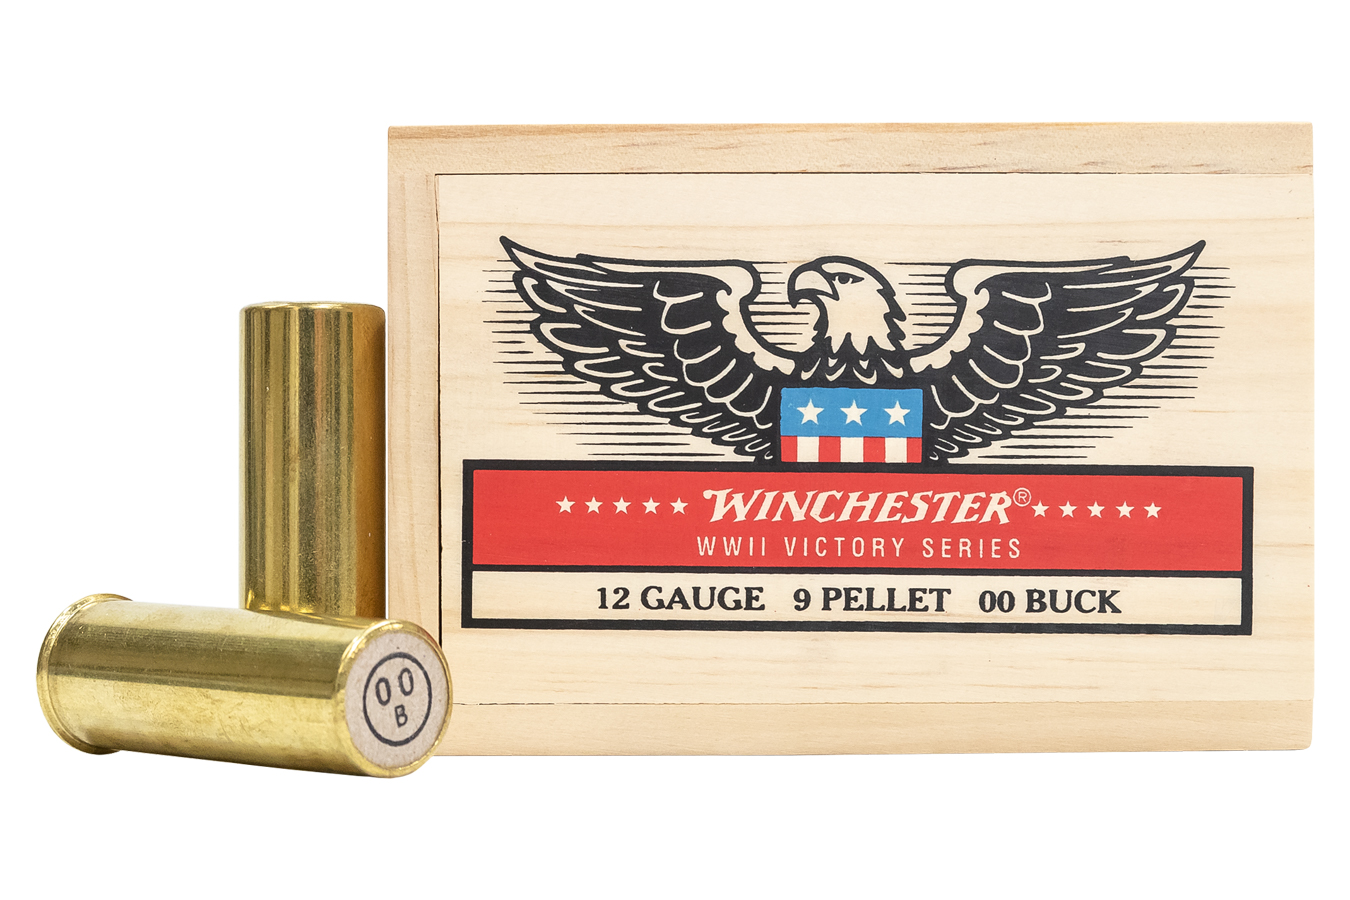 Winchester WWII Victory series M19 12GA 00 Buck : r/Firearms